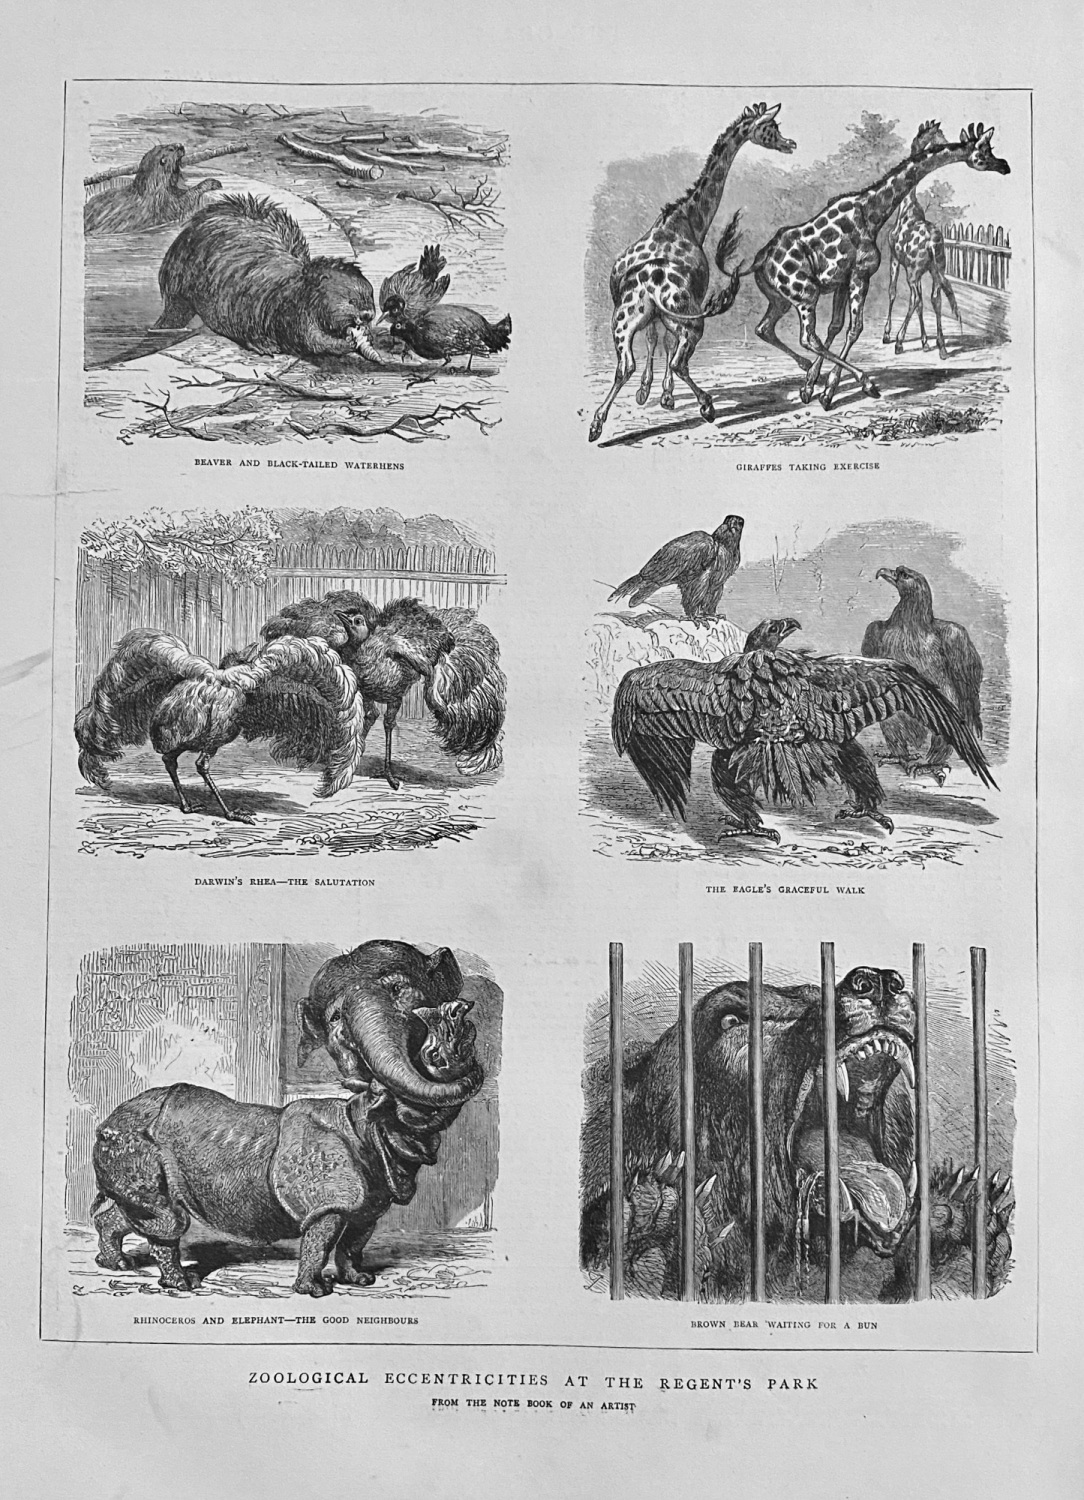 Zoological Eccentricities at the Regent's Park.  1871.